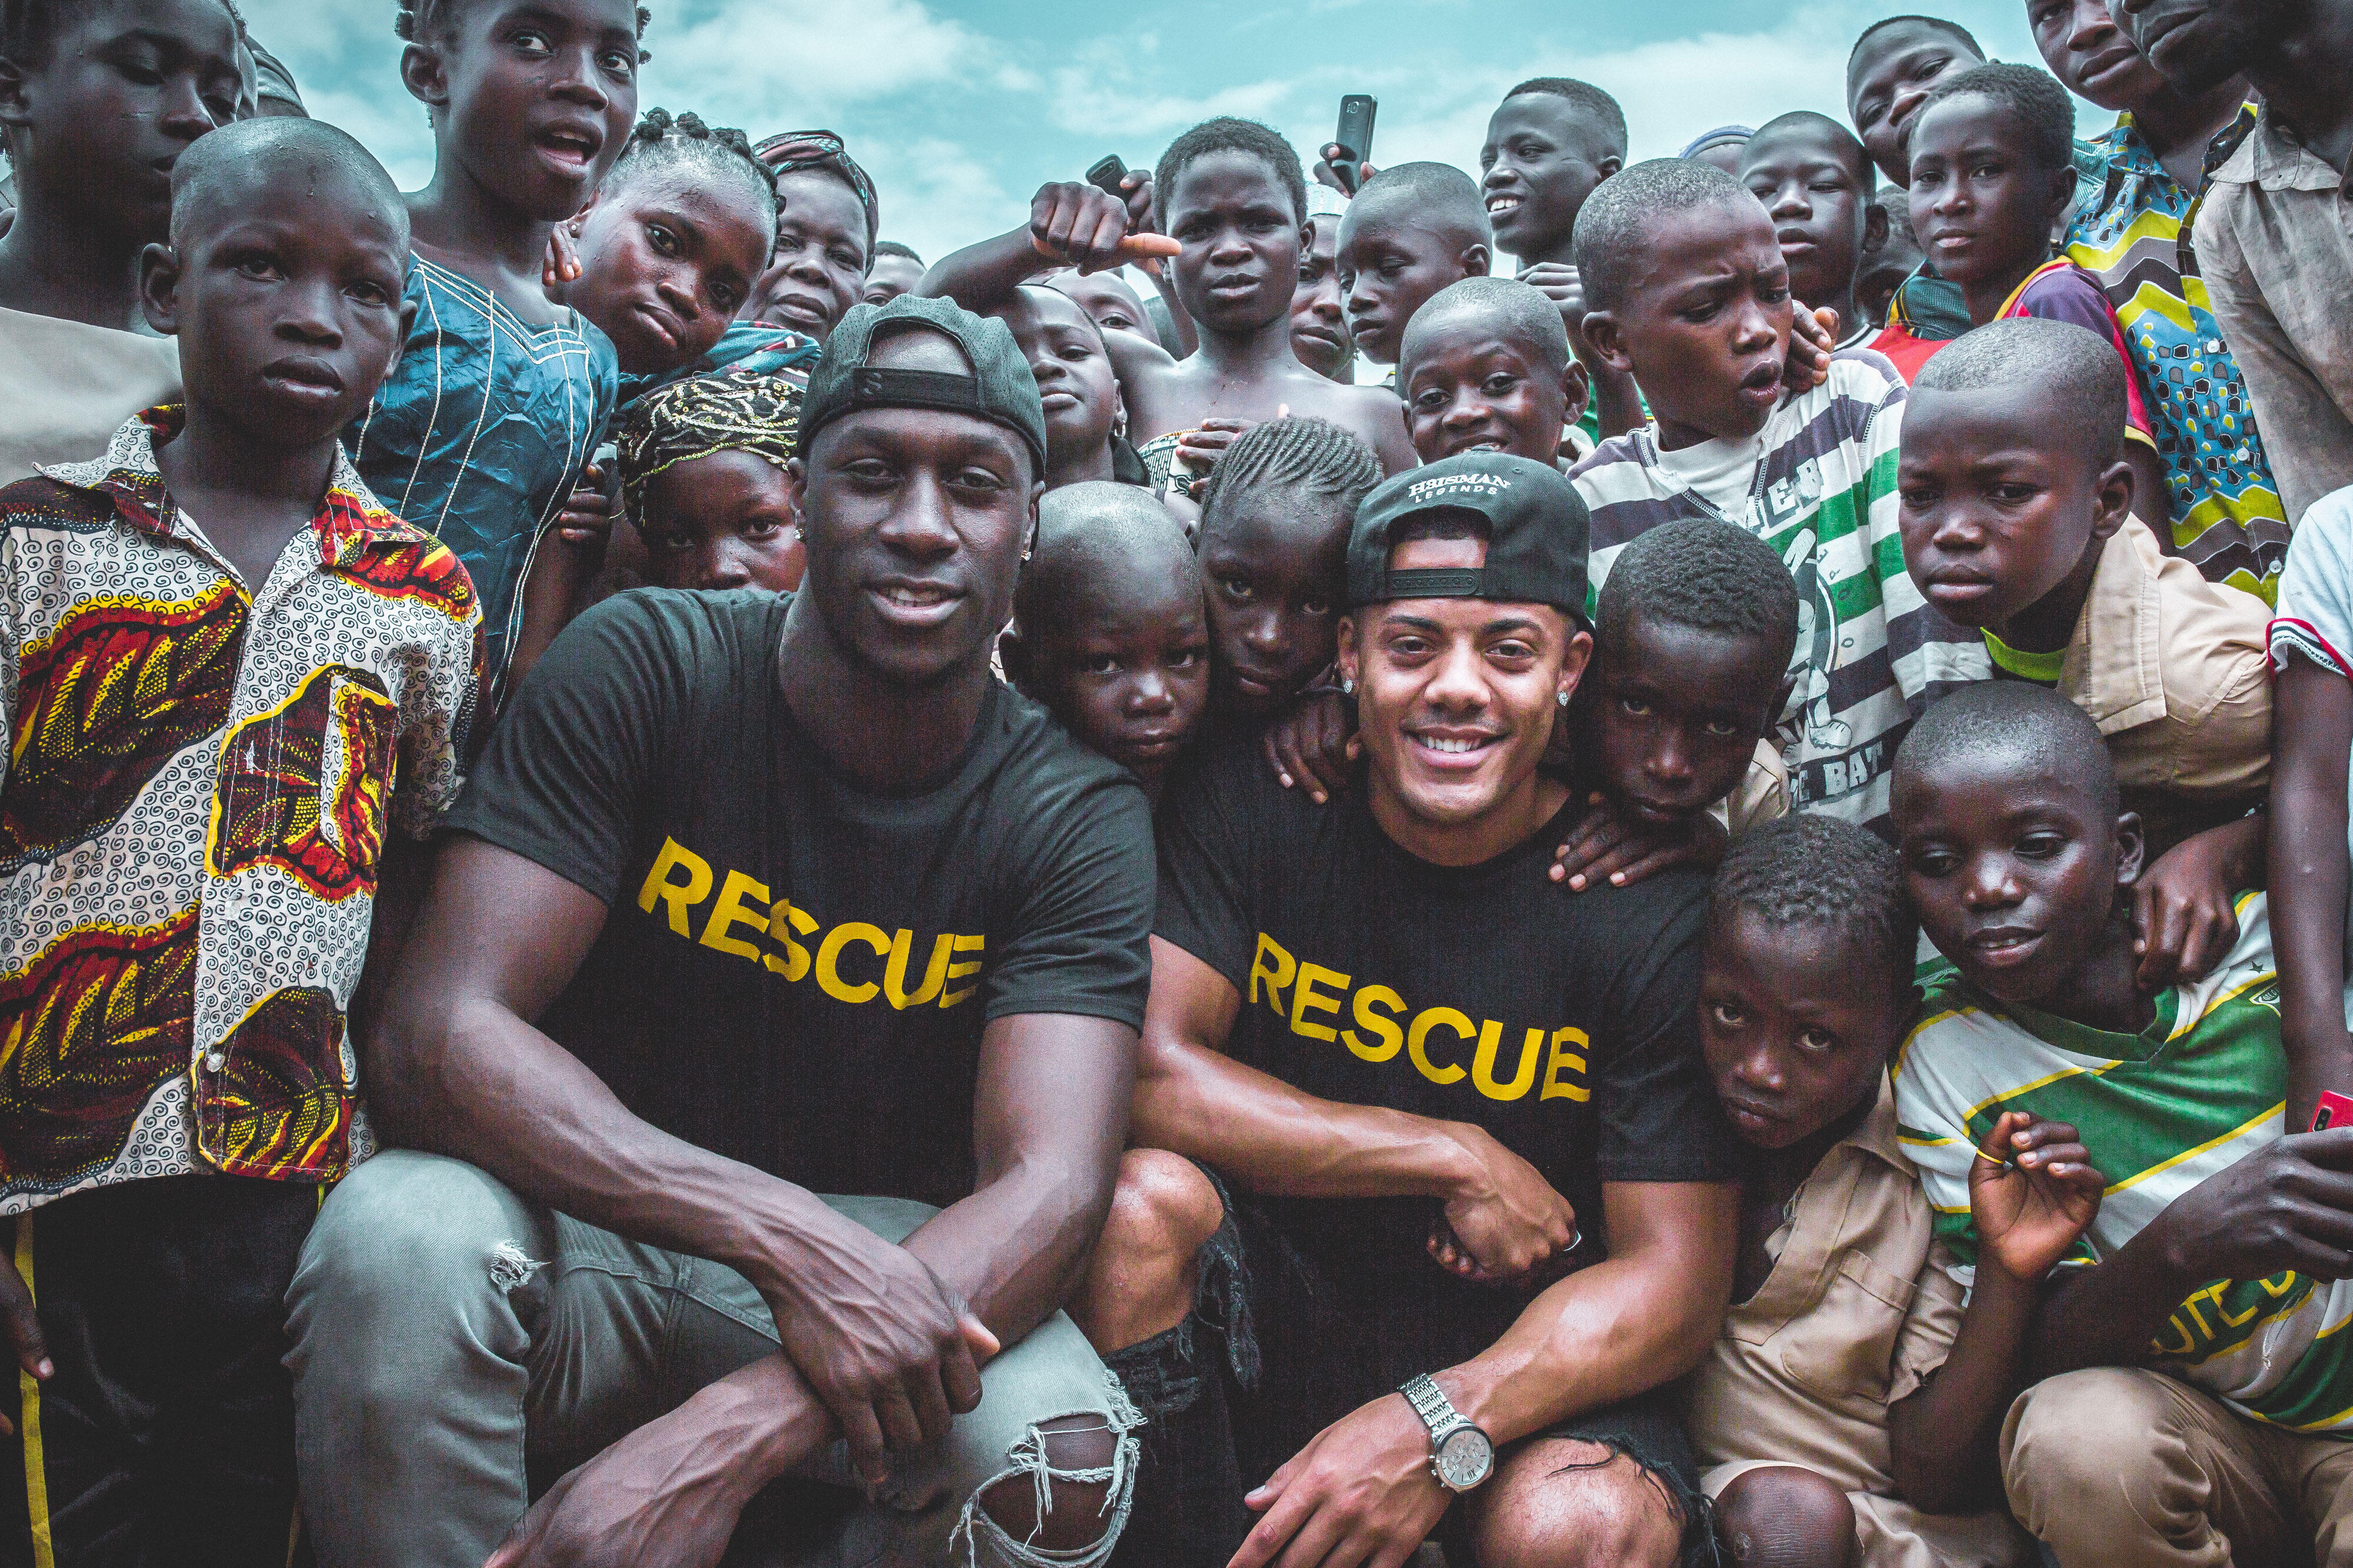 Nico & Vinz with a group of children in Ivory Coast